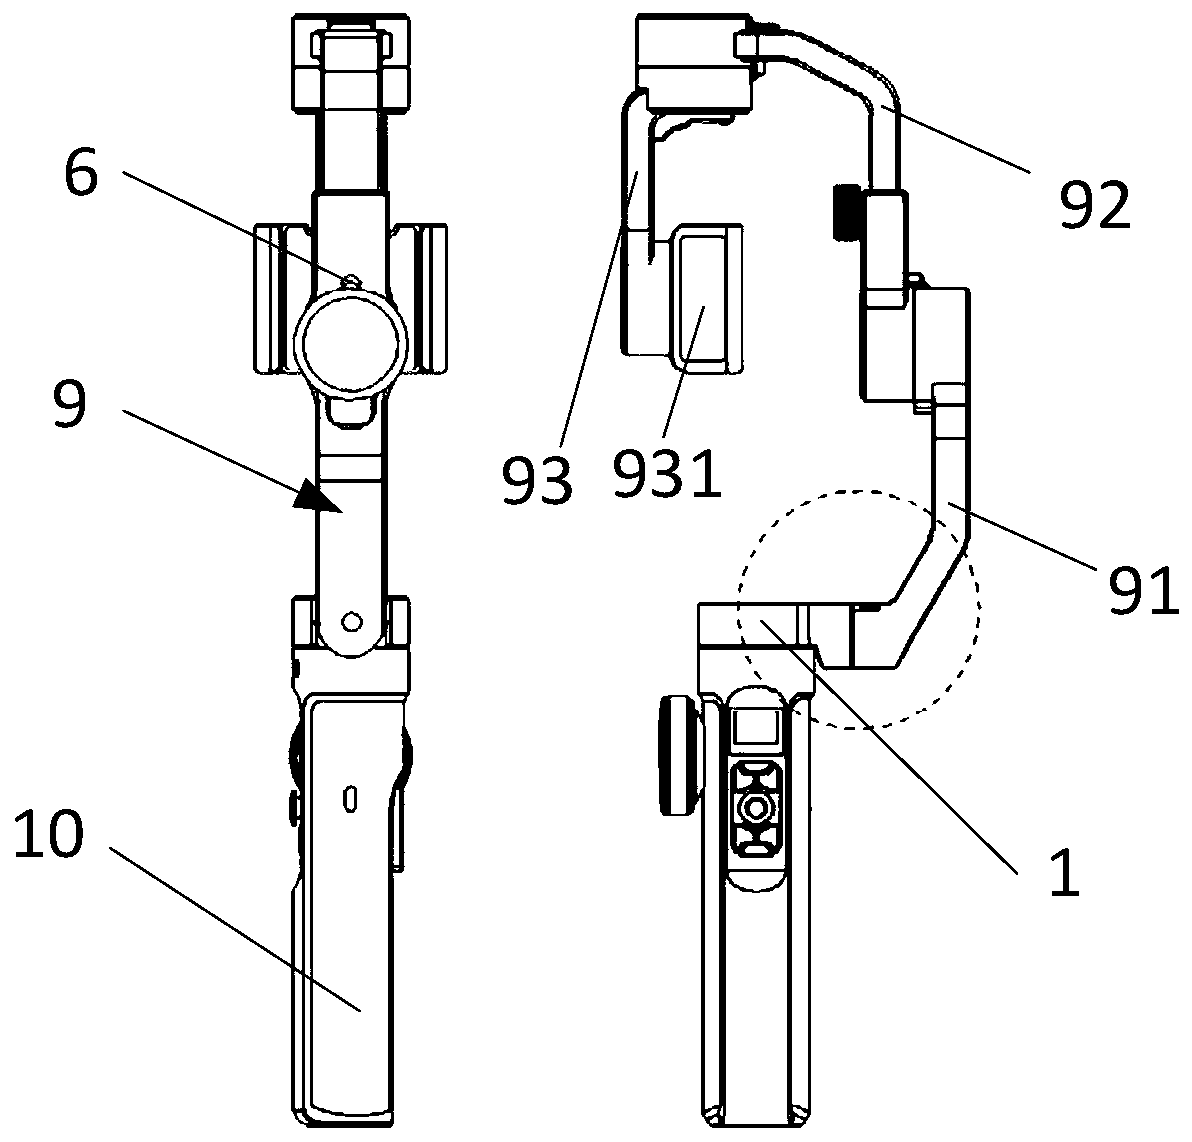 Stabilizer folding structure and handheld stabilizer